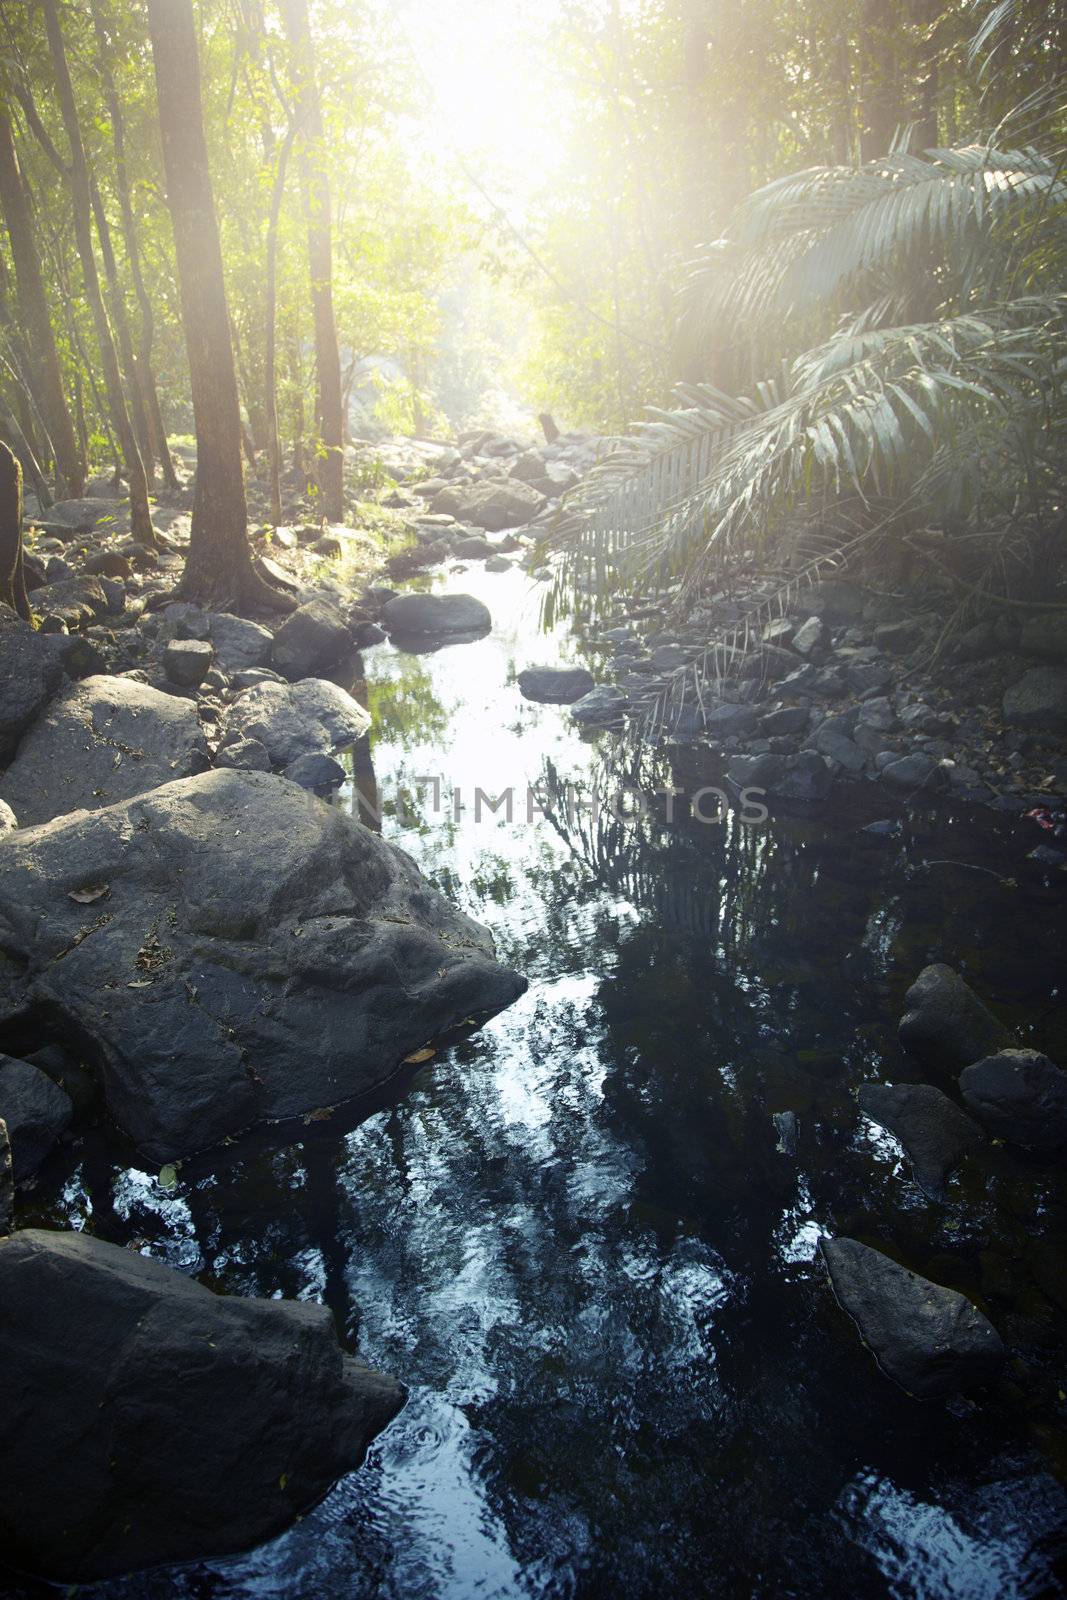 Small river in the rainforest. Vertical photo with natural colors and darkness